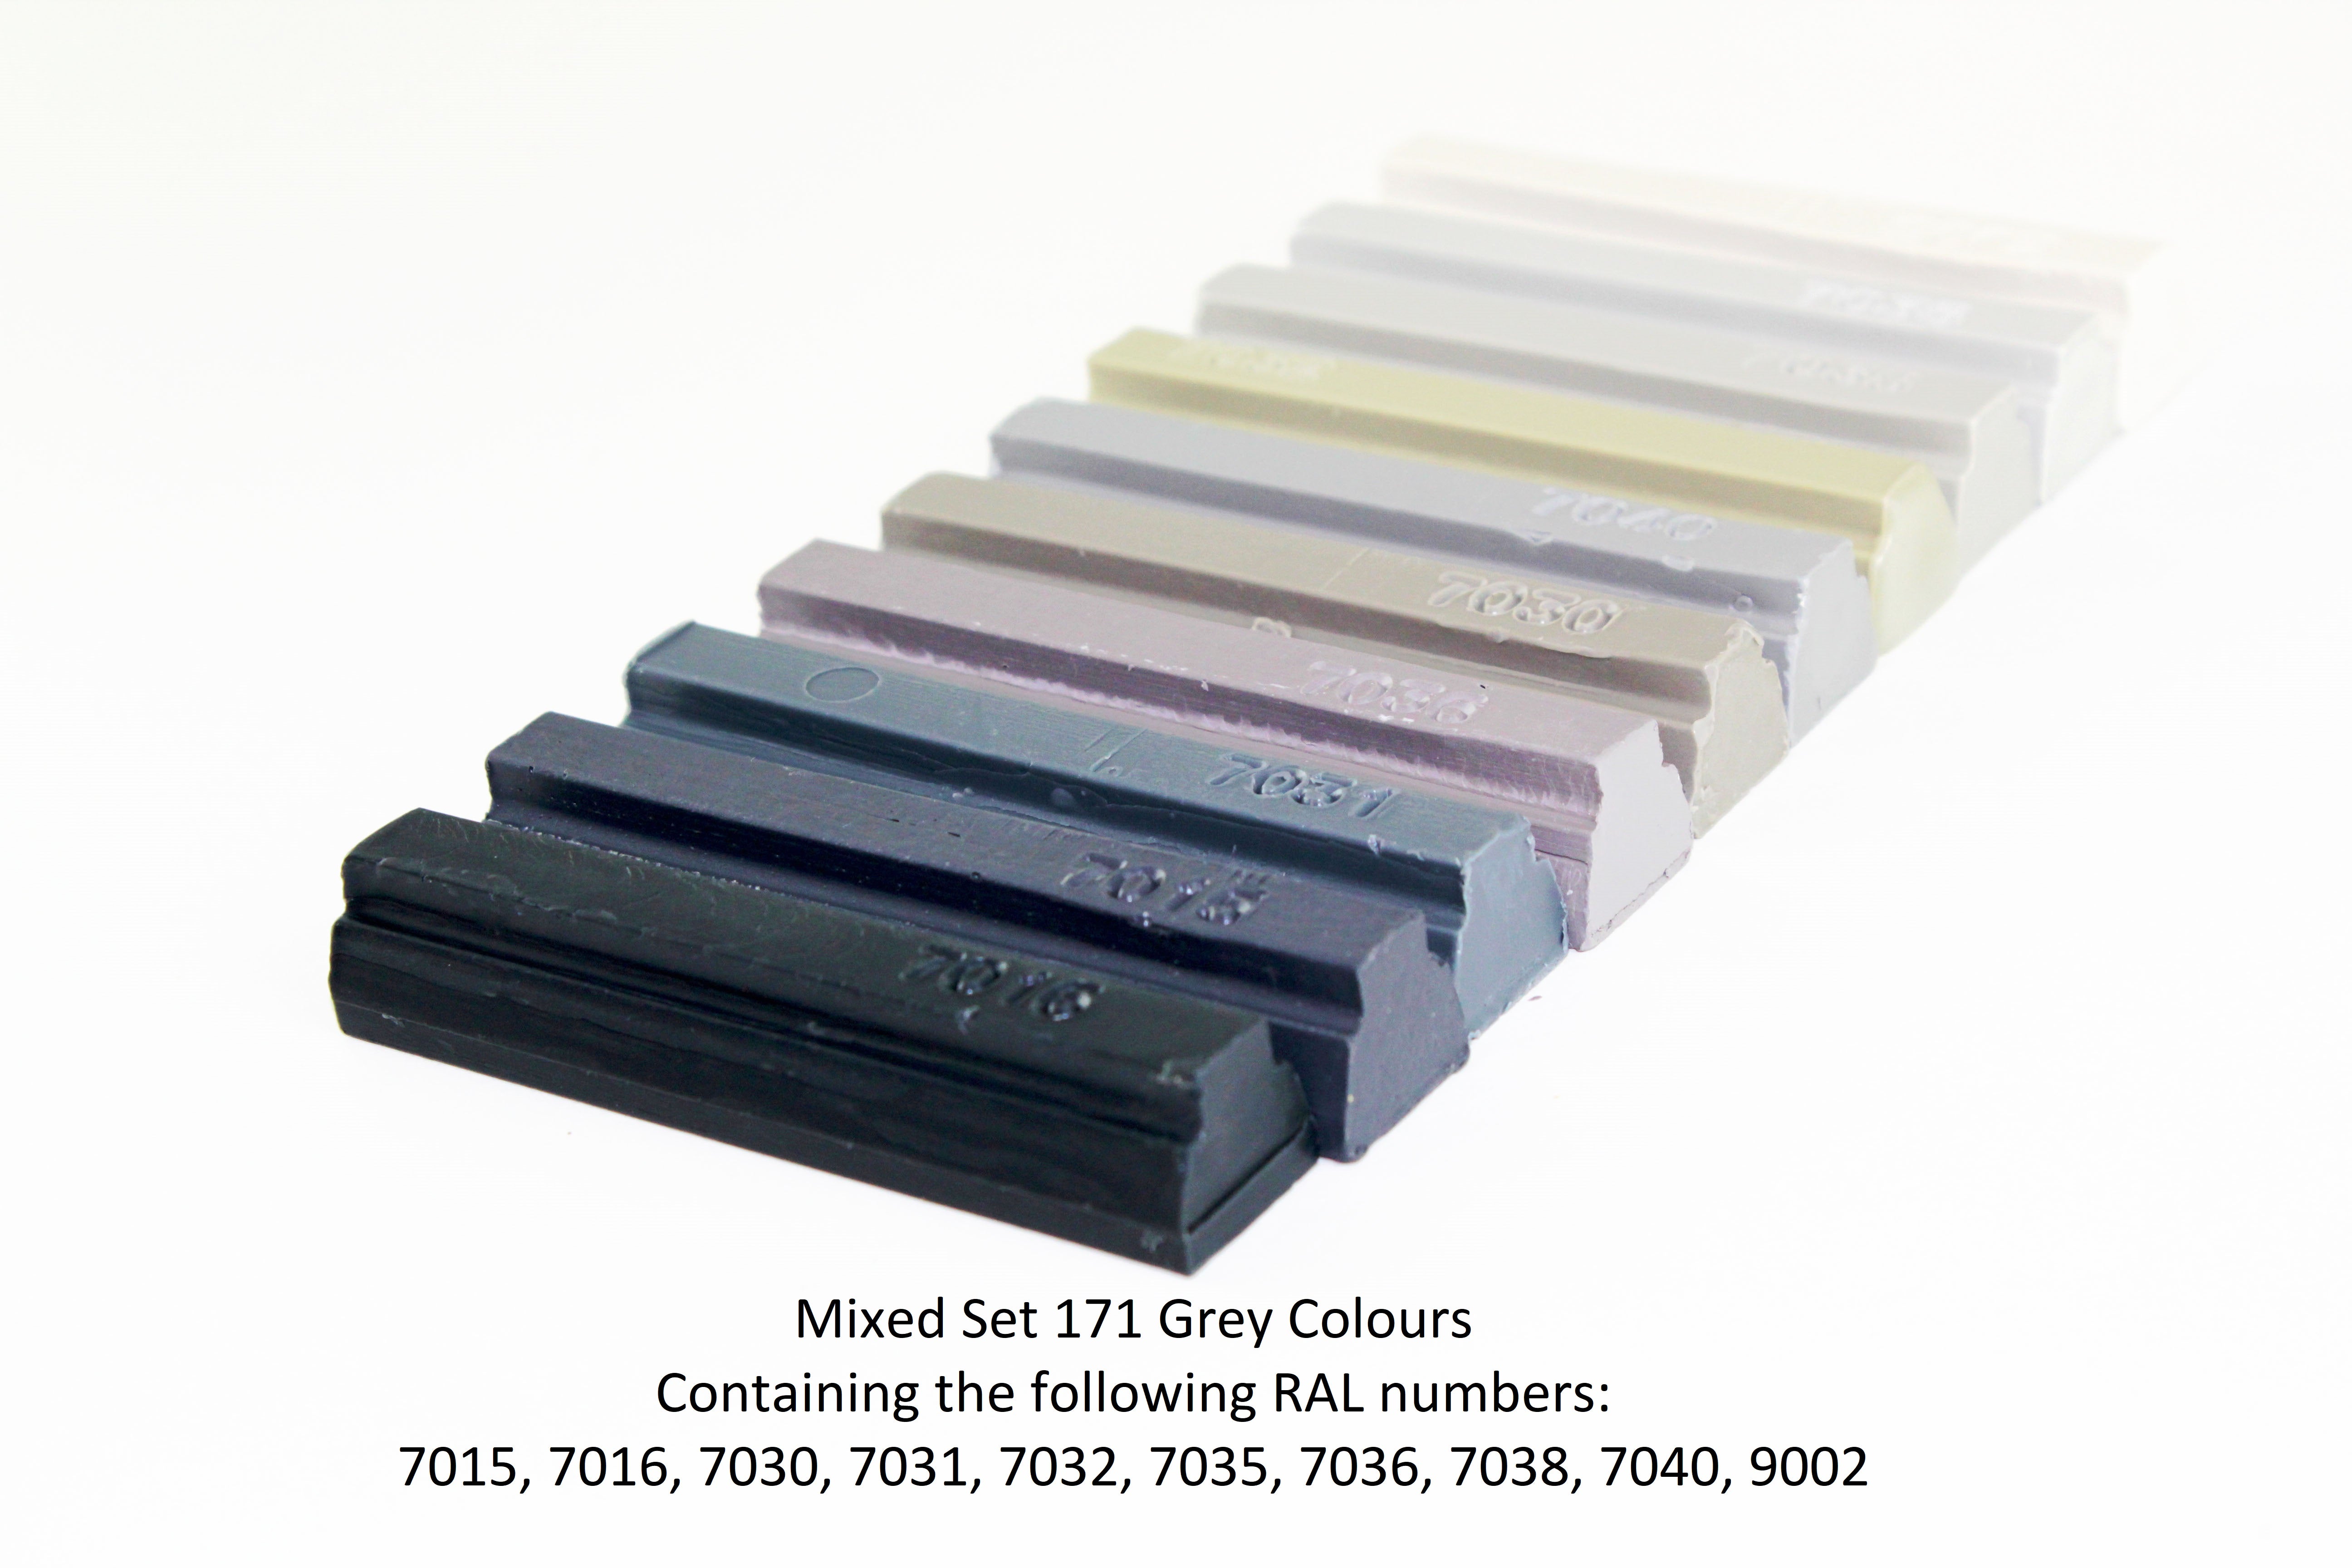 Konig Furniture Repair Wax Filler Sets 10 x 8cm Various Colours Hard or Soft Wax: 150, 171, 972, 973, 974 and 975